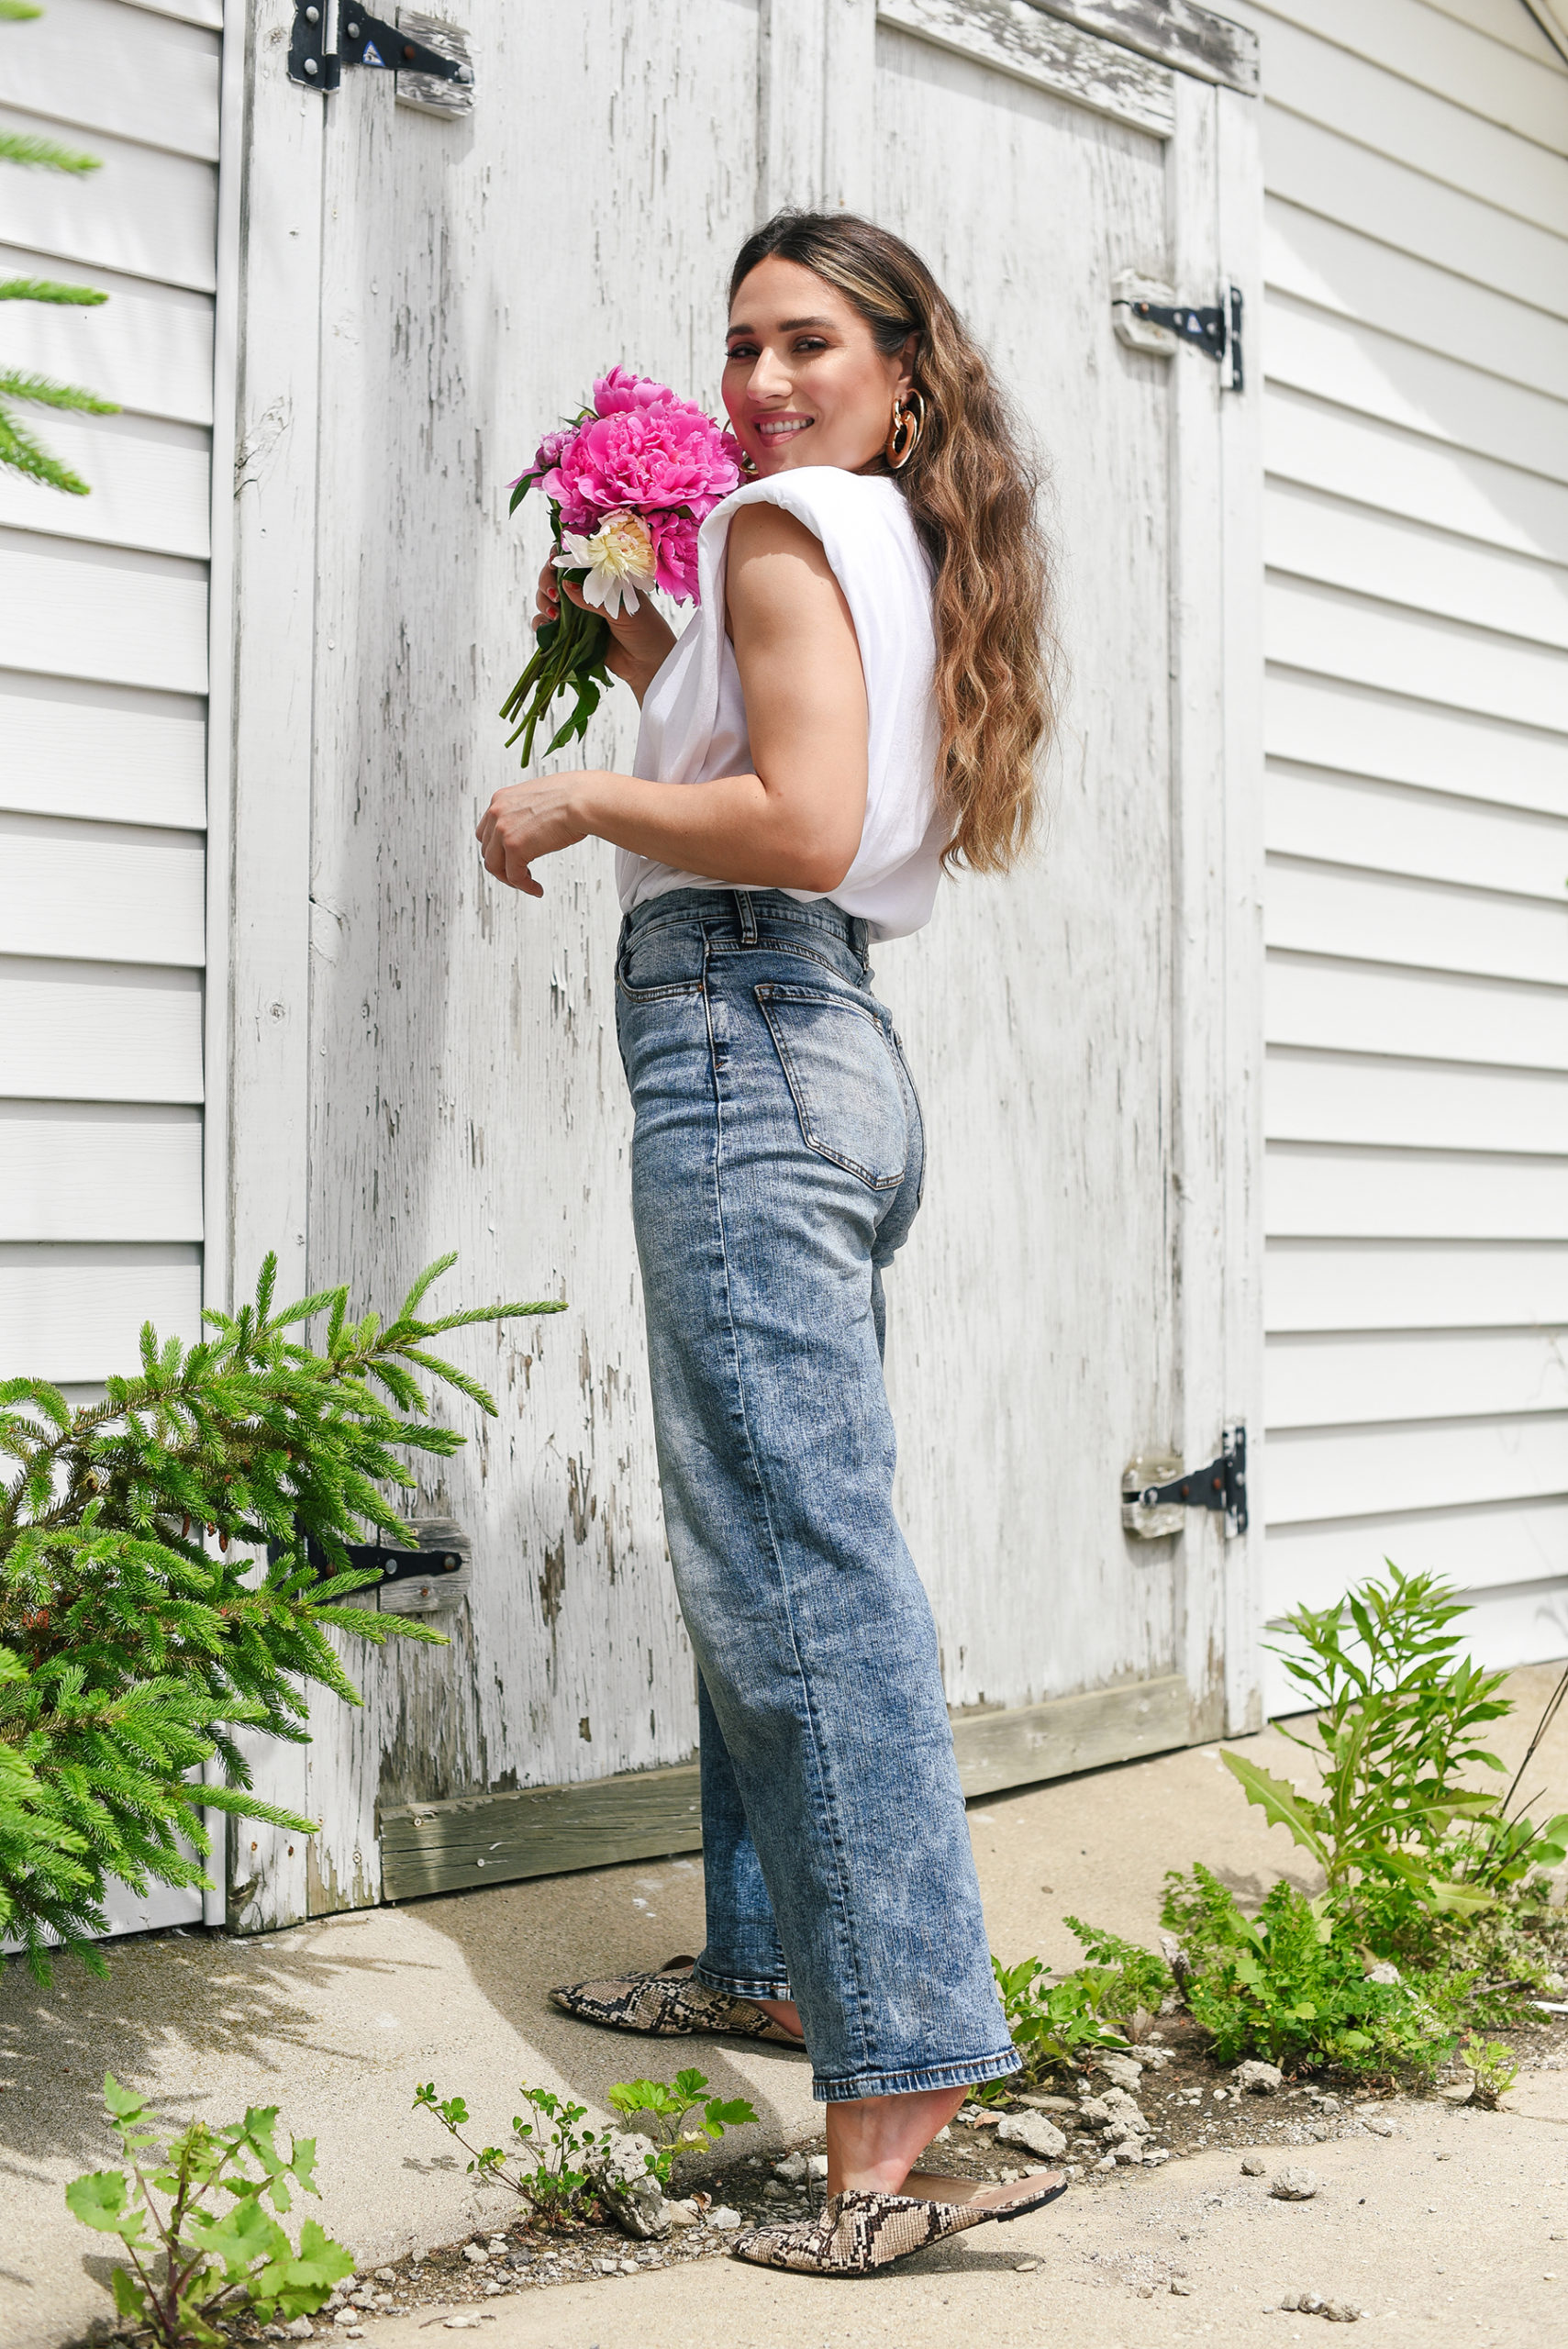 white-tee-light-blue-jeans-crimped-hair-summer-girl-easy-outfit-street-style-look-peony